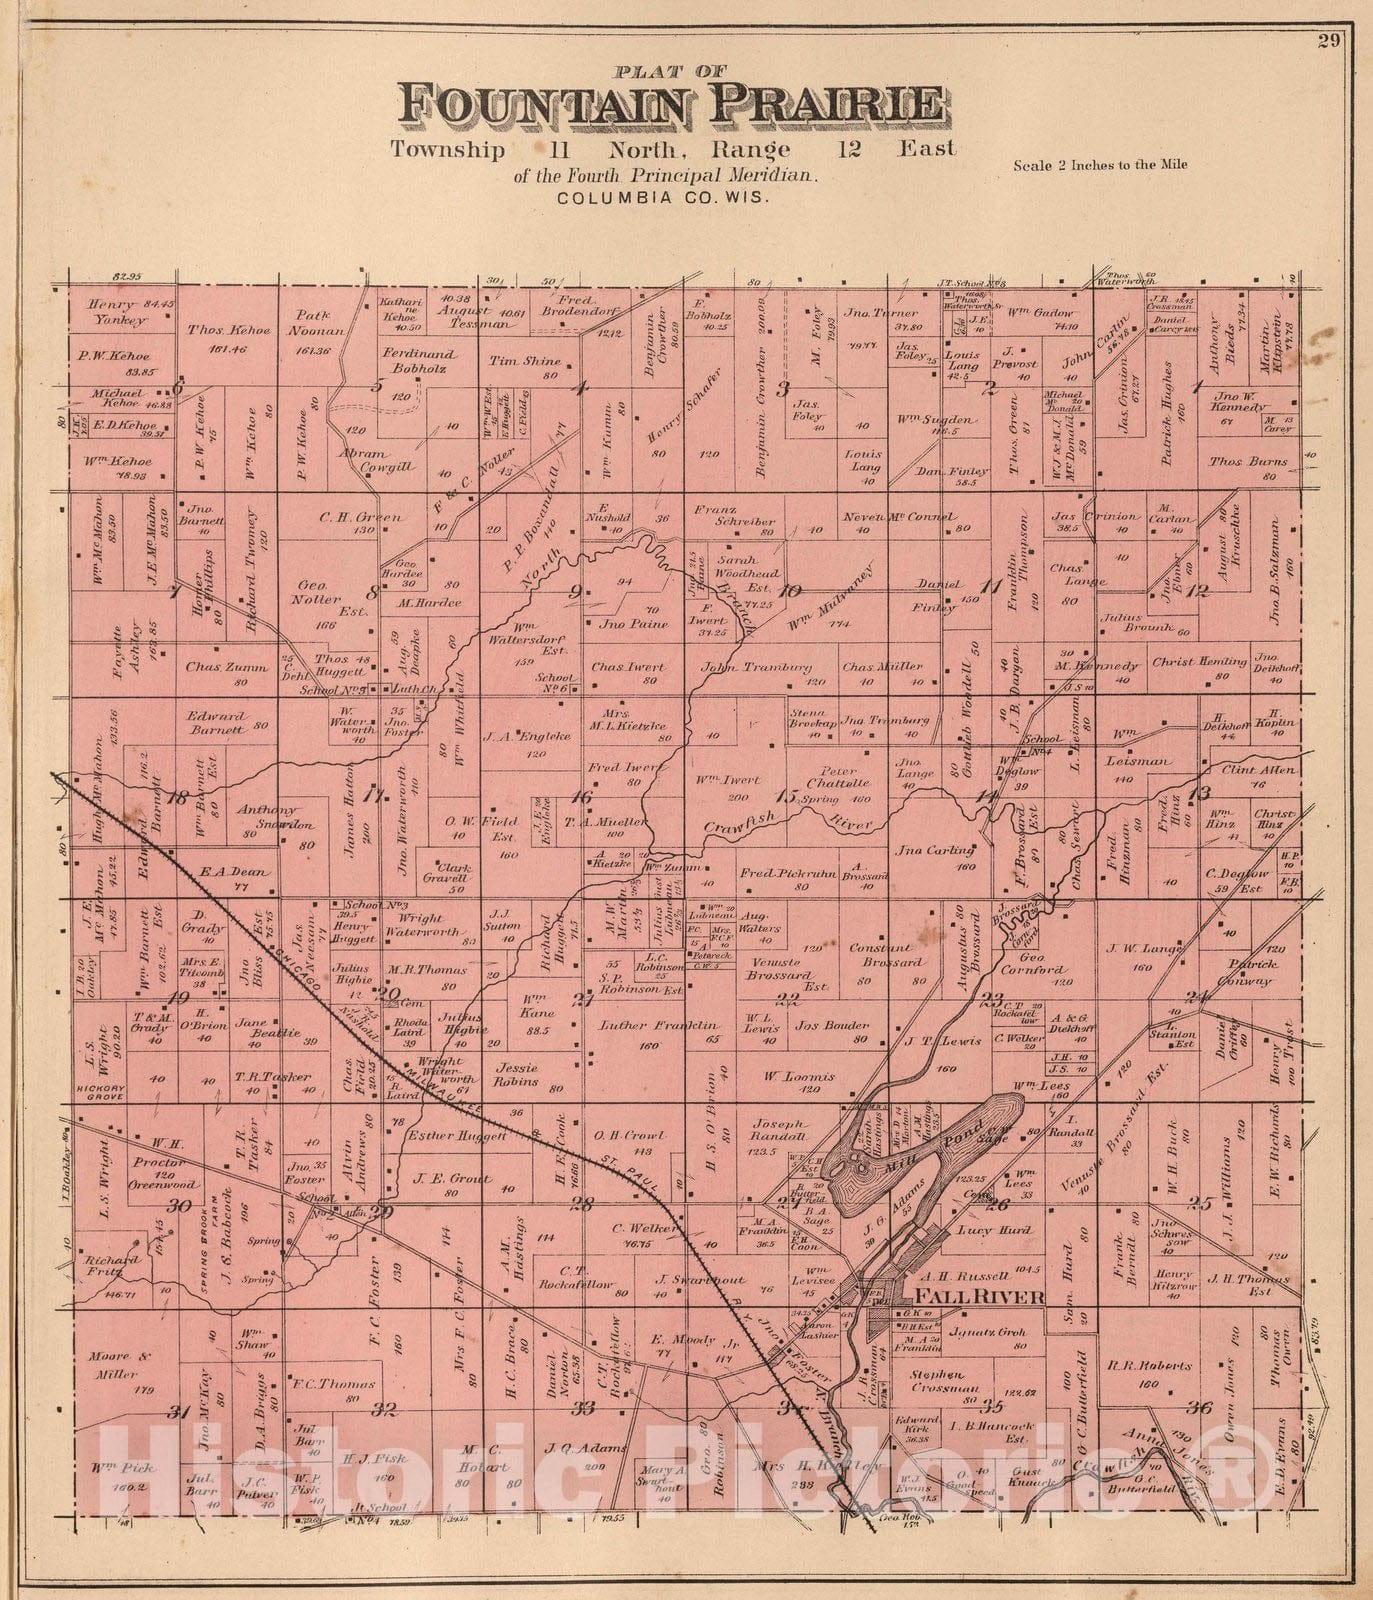 Historic Map : 1890 Fountain Prairie Township, Columbia County, Wisconsin. - Vintage Wall Art